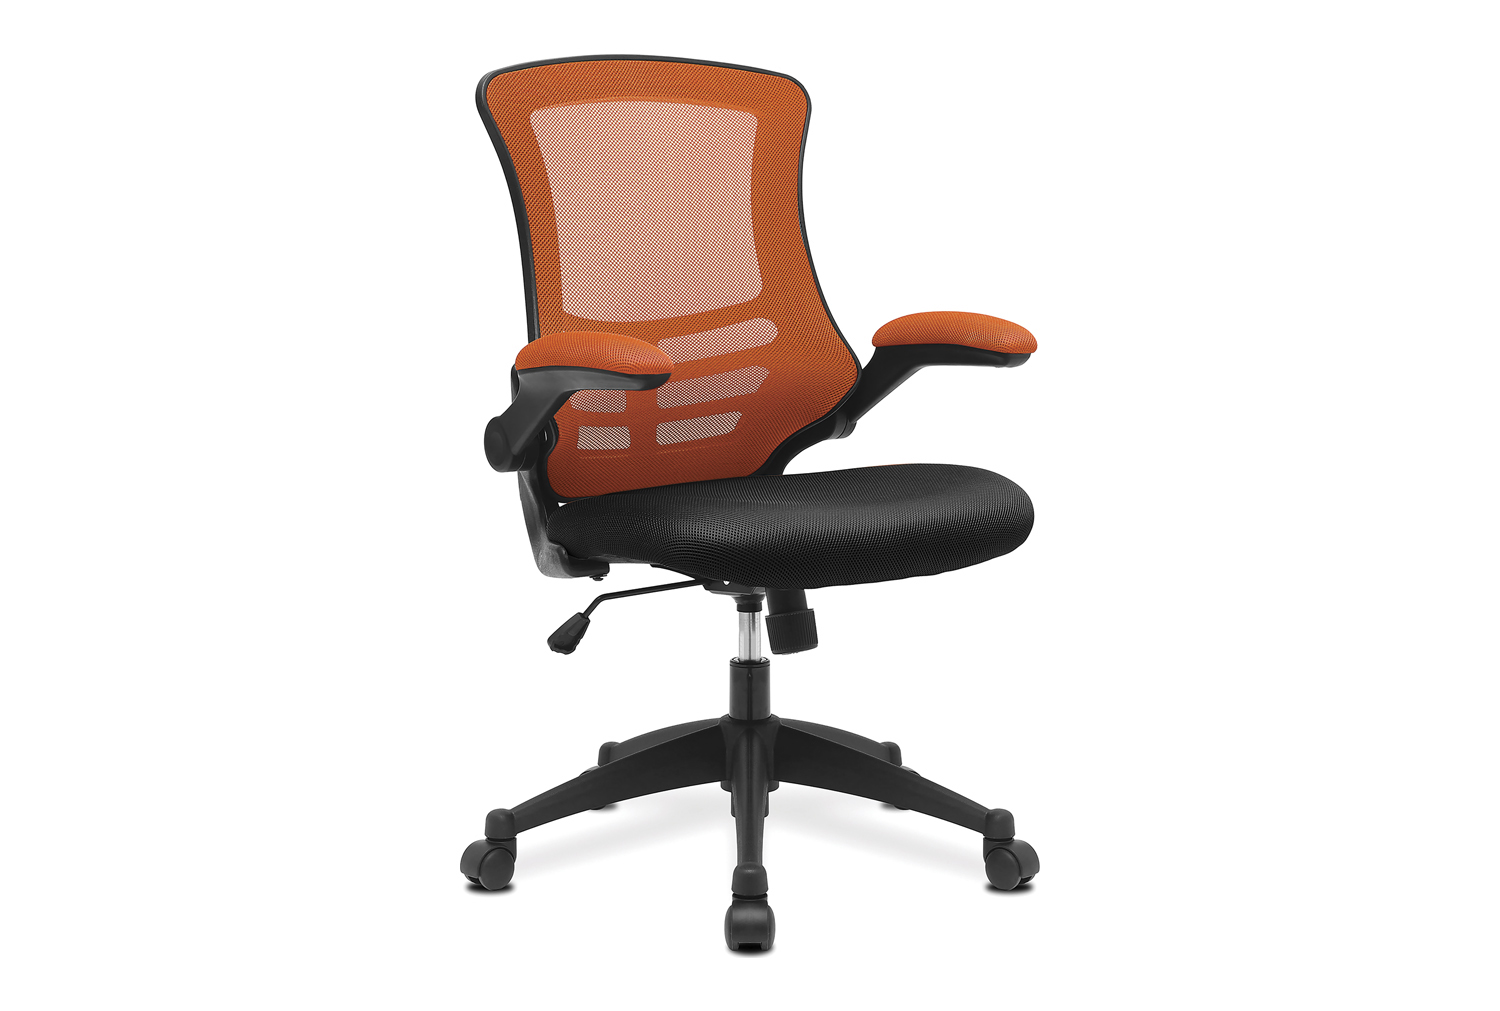 Moon High Mesh Back Operator Office Chair With Black Base (Orange/Black), Fully Installed